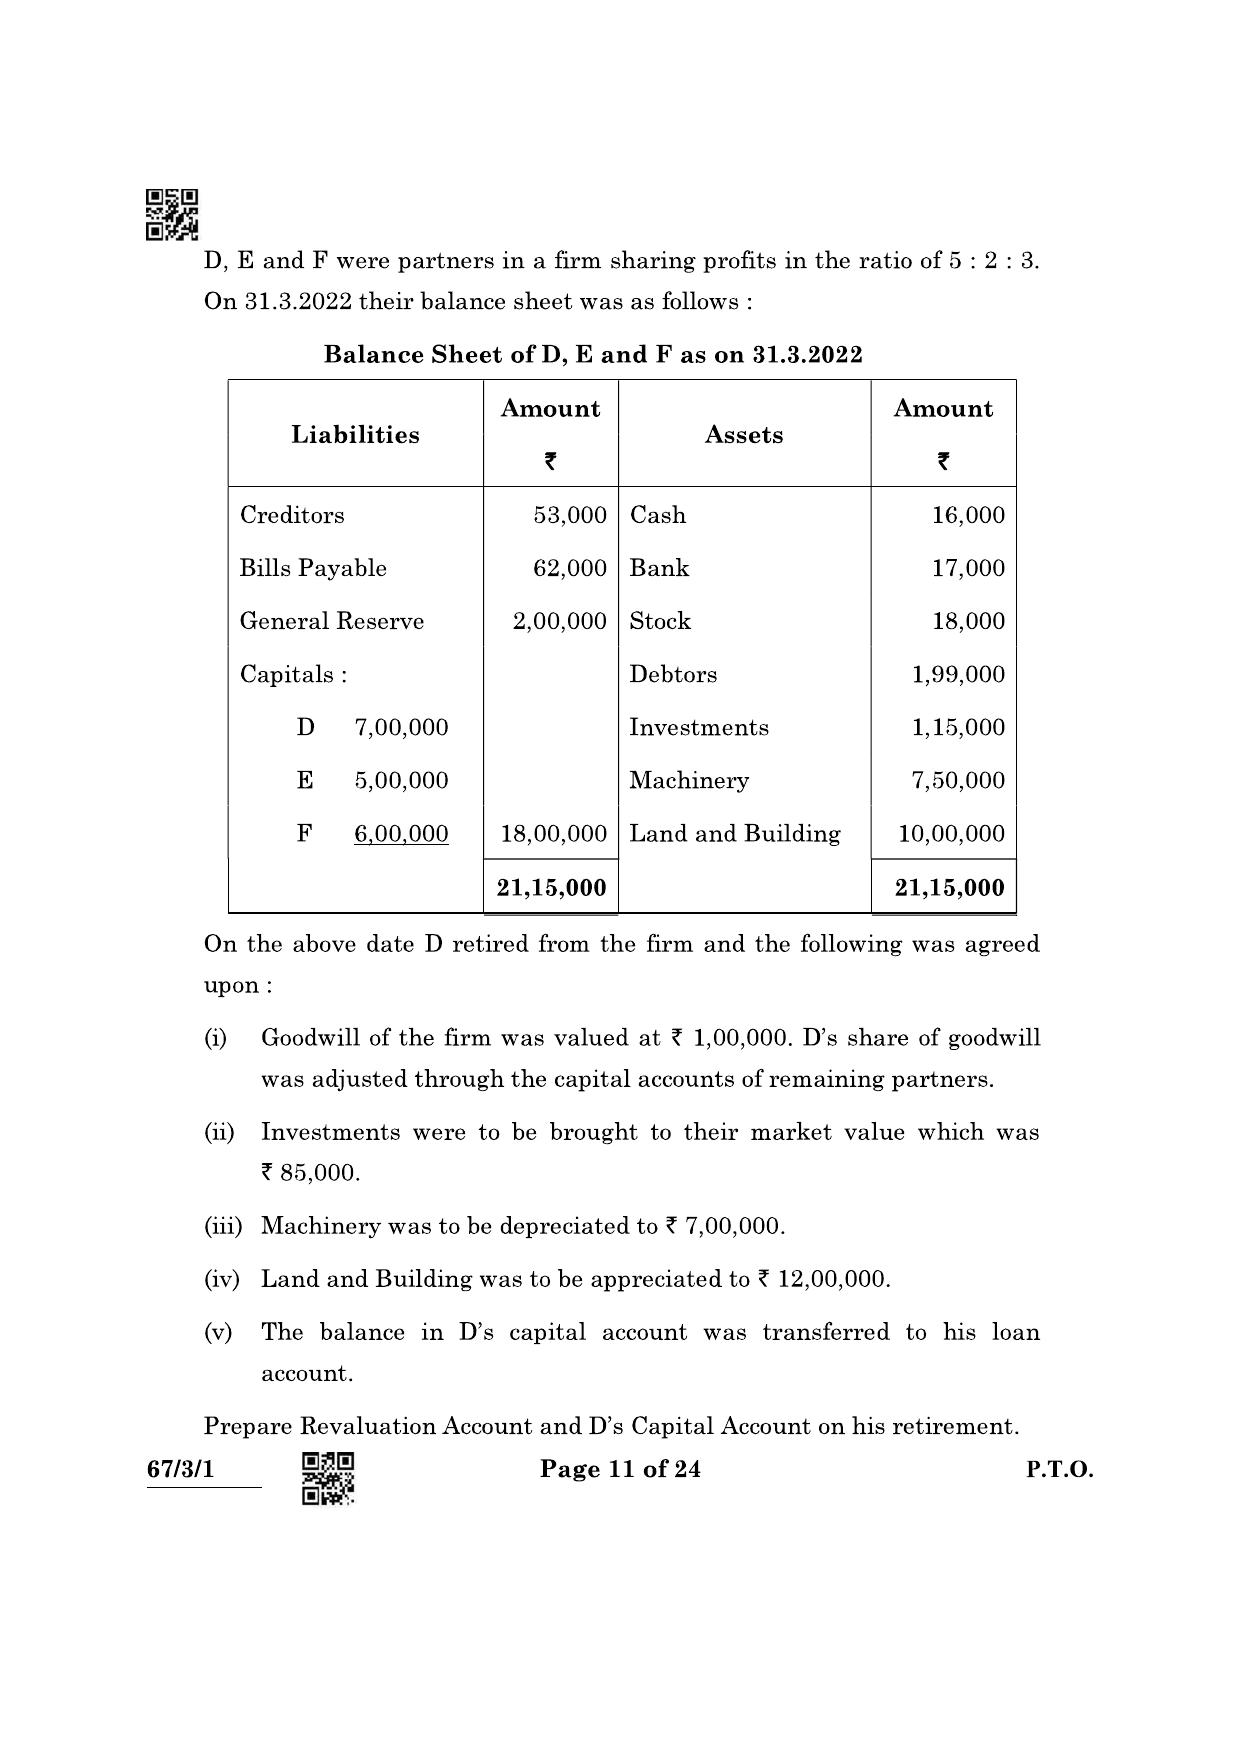 CBSE Class 12 67-3-1 Accountancy 2022 Question Paper - Page 11